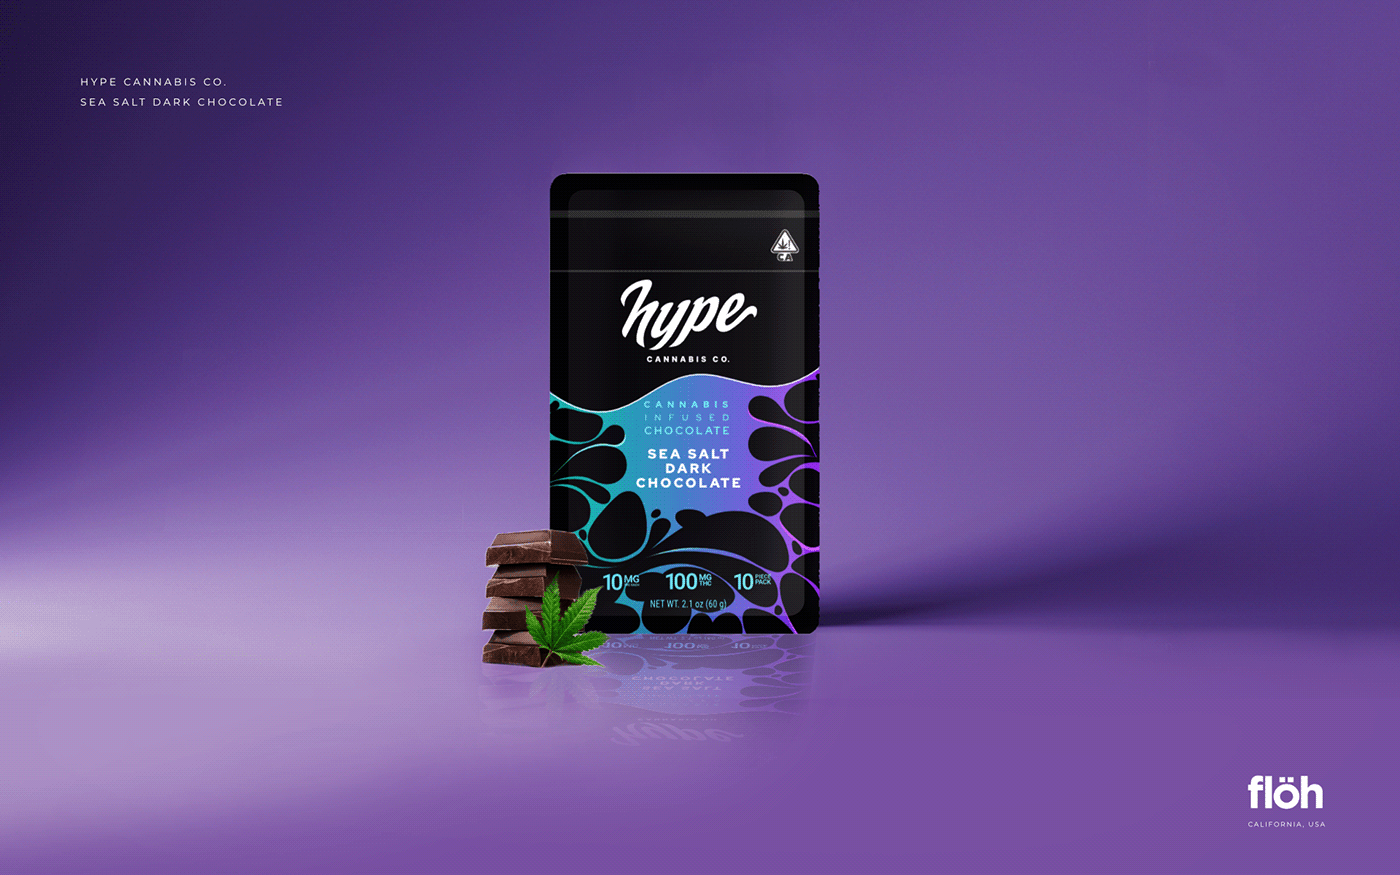 PACKAGE DESIGN & ILLUSTRATION HYPE CANNABIS CO. CHOCOLATE by flohcreative.com